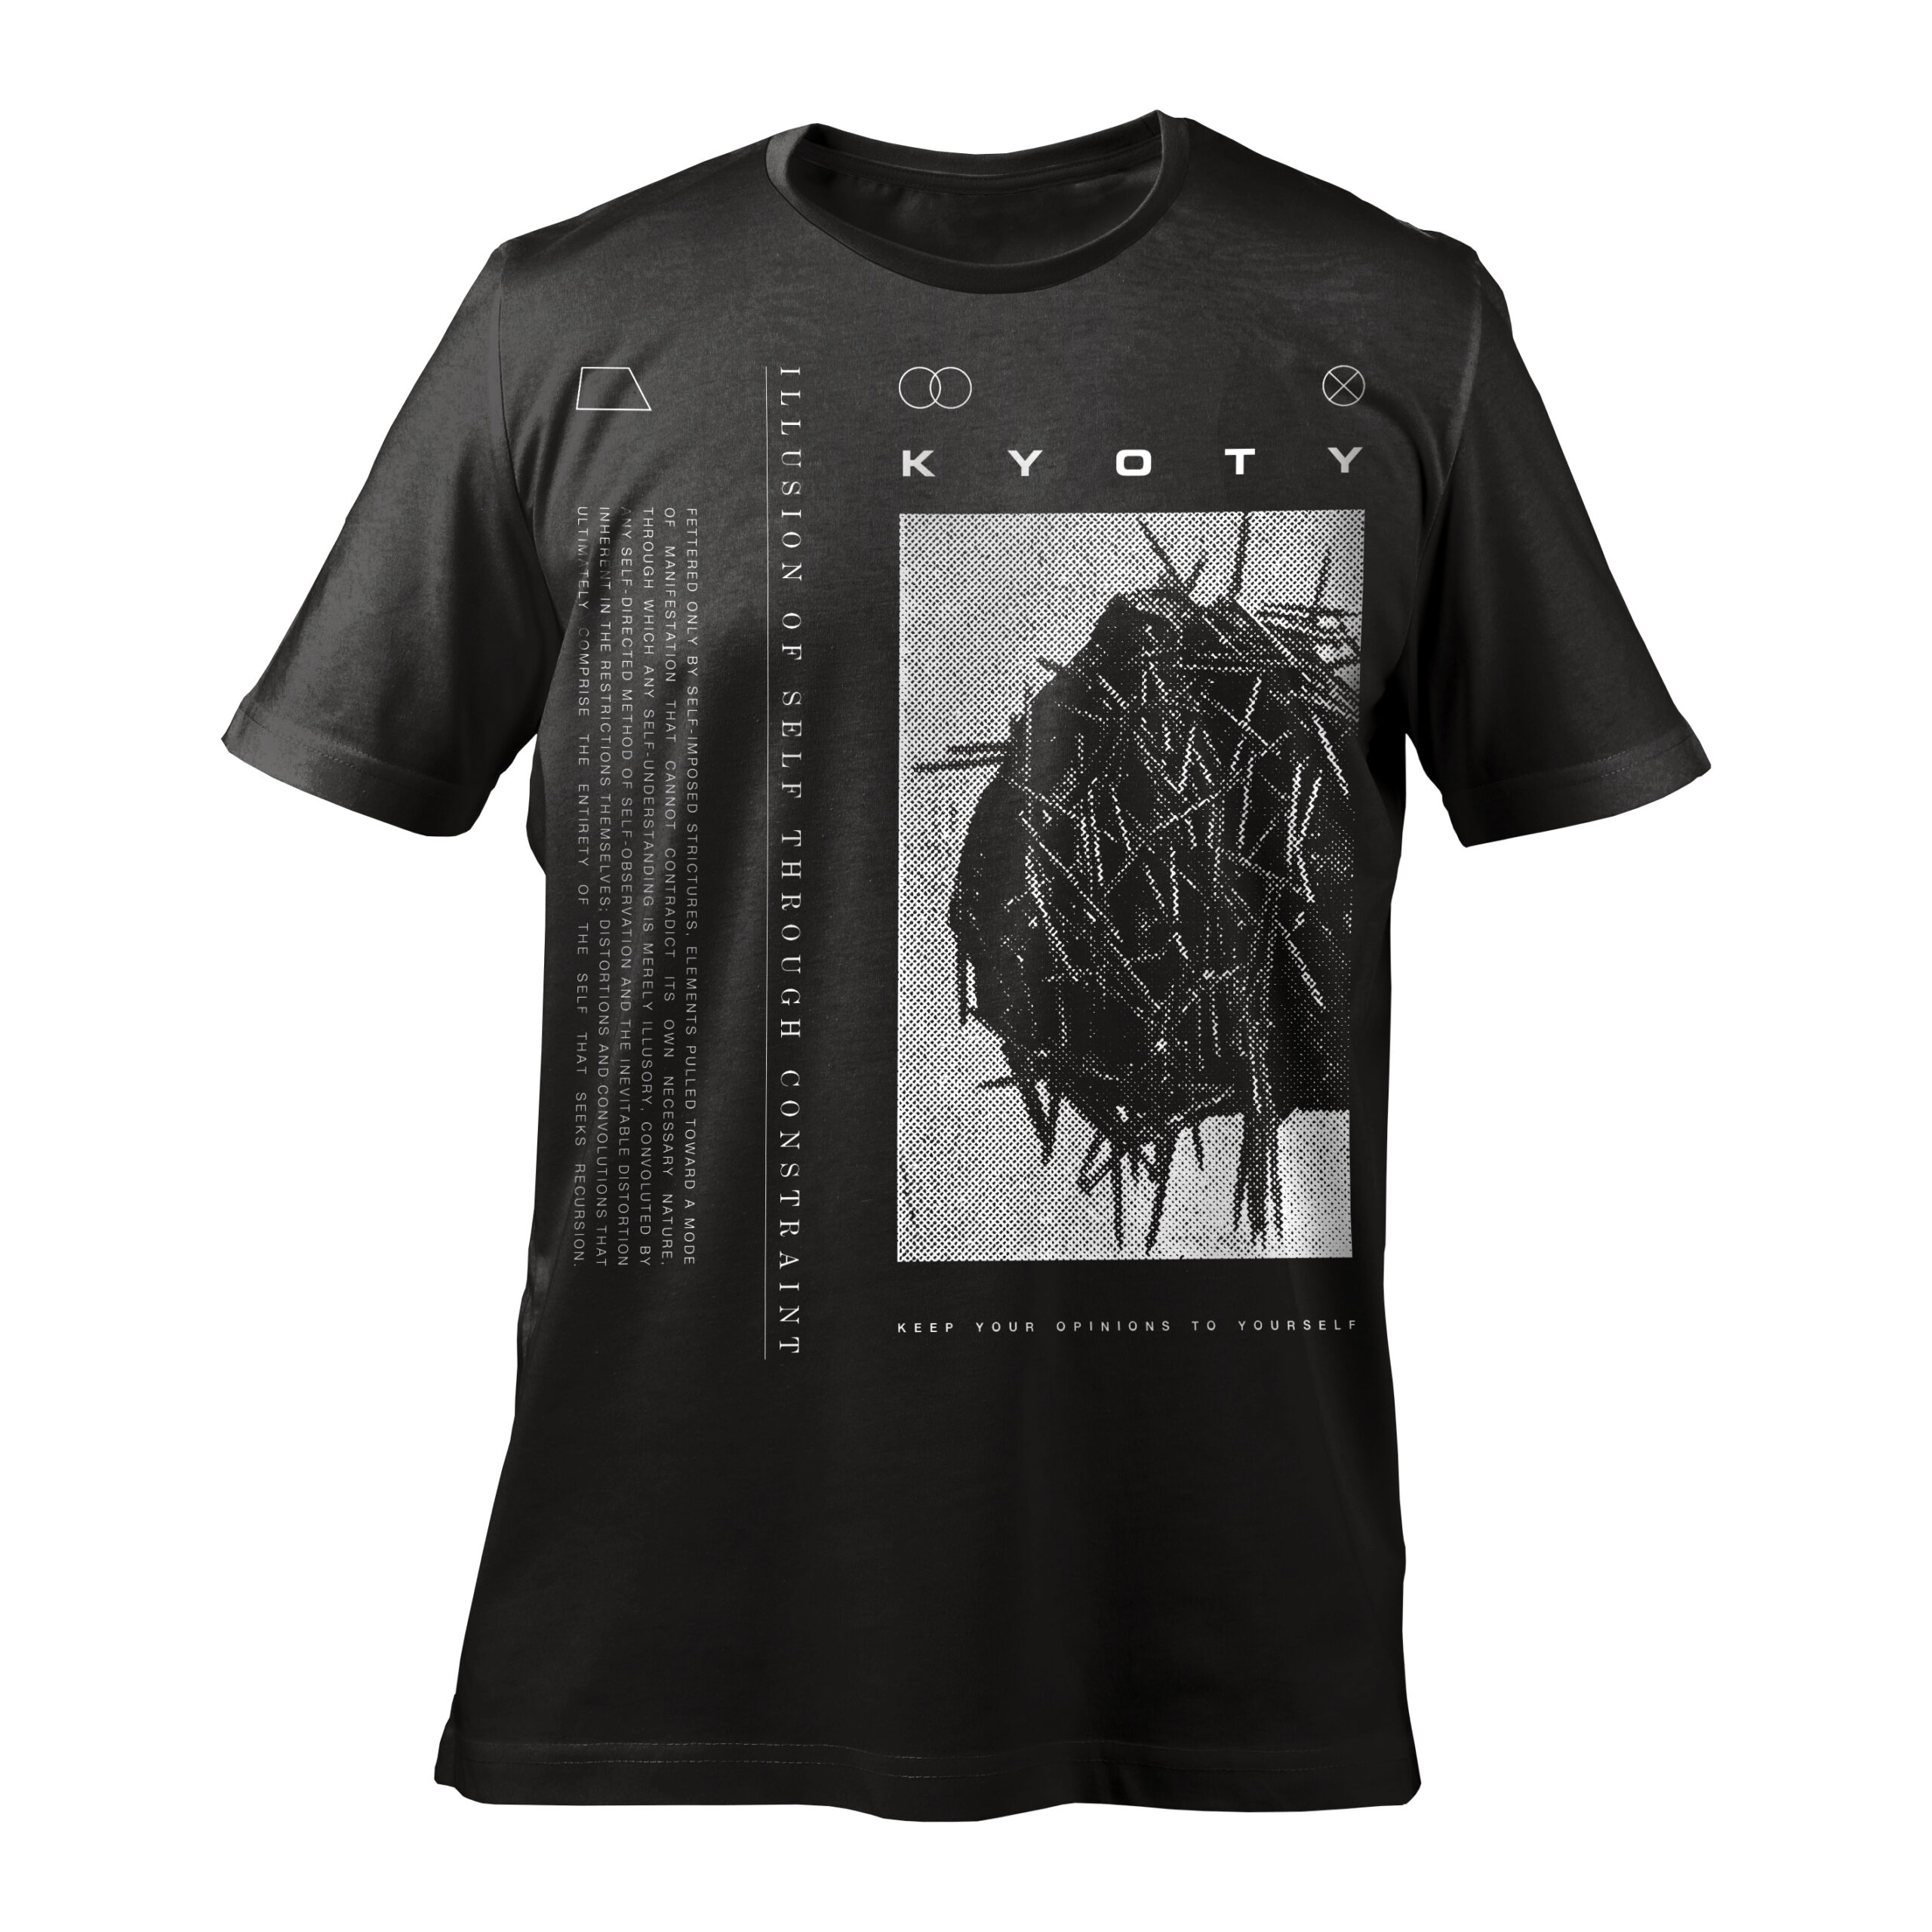 KYOTY “Constraint” T-Shirt – Deafening Assembly